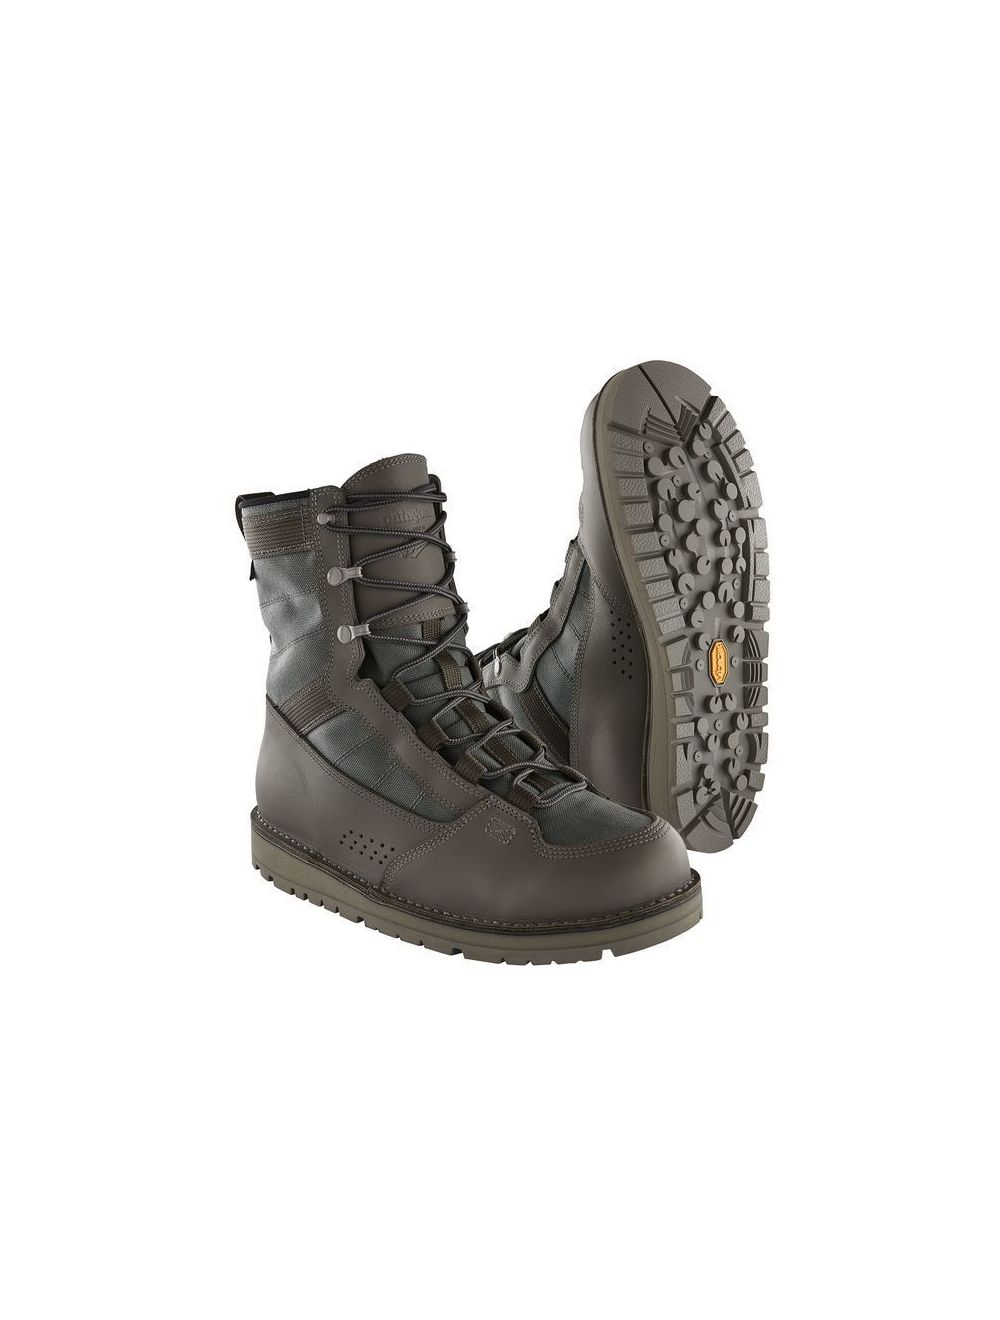 grundigt specifikation Initiativ Patagonia River Salt Boot by Danner TheFlyStop